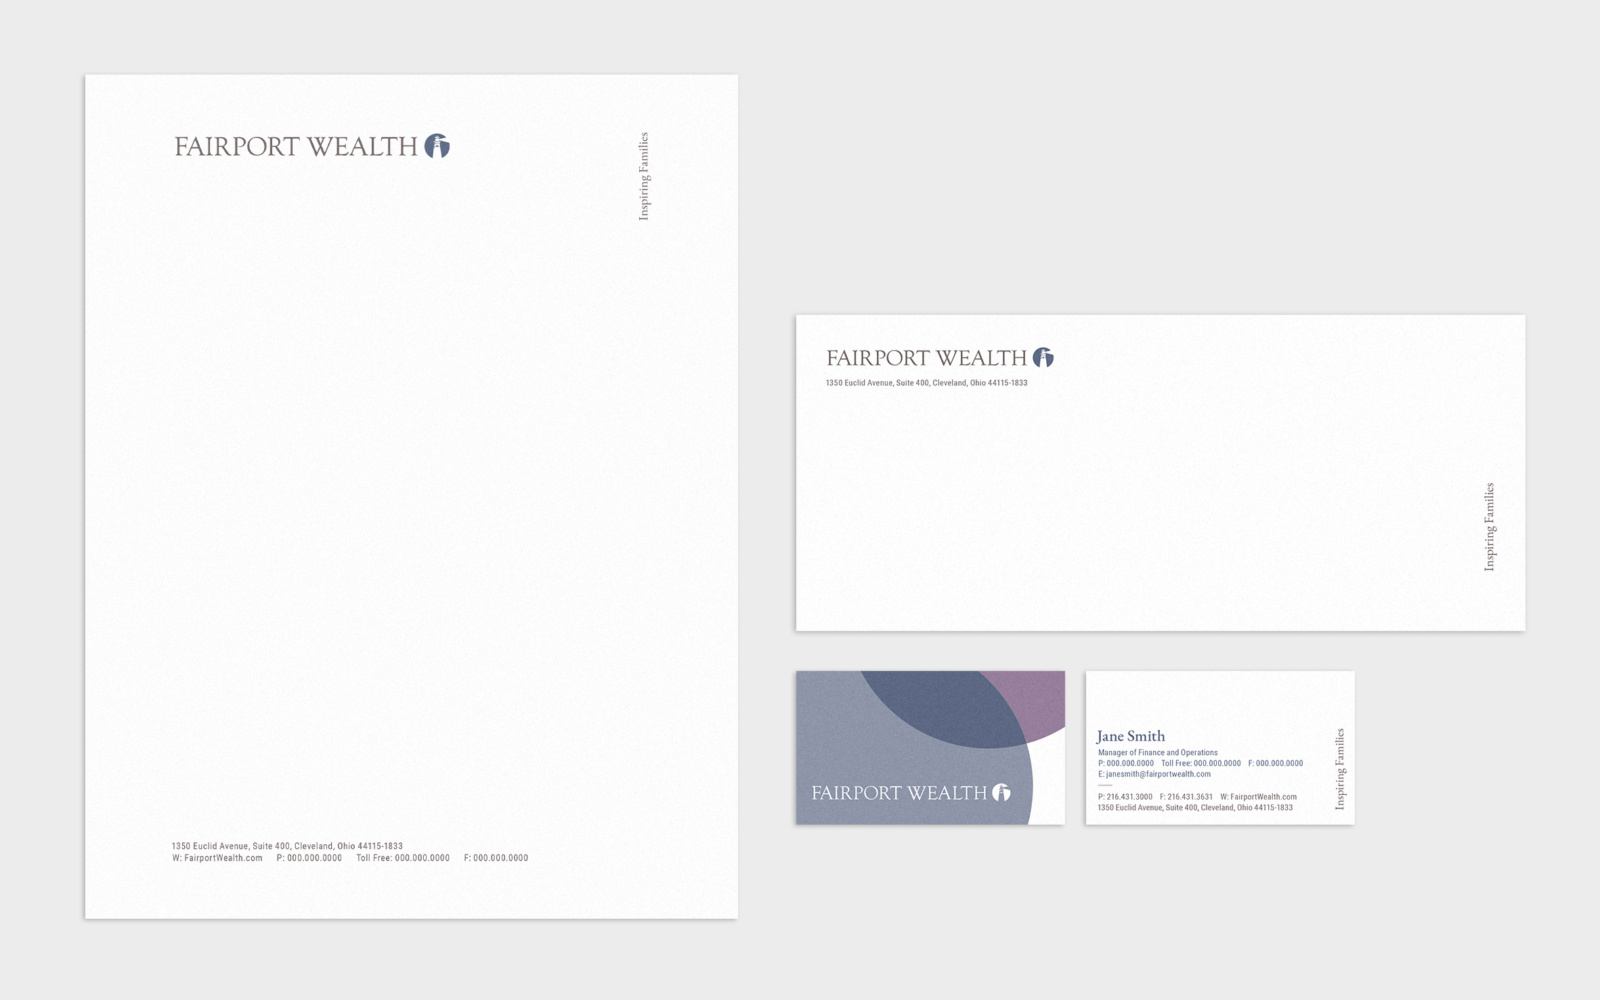 Letterhead, business envelope, and front and back views of the business cards from the new Fairport Wealth identity.